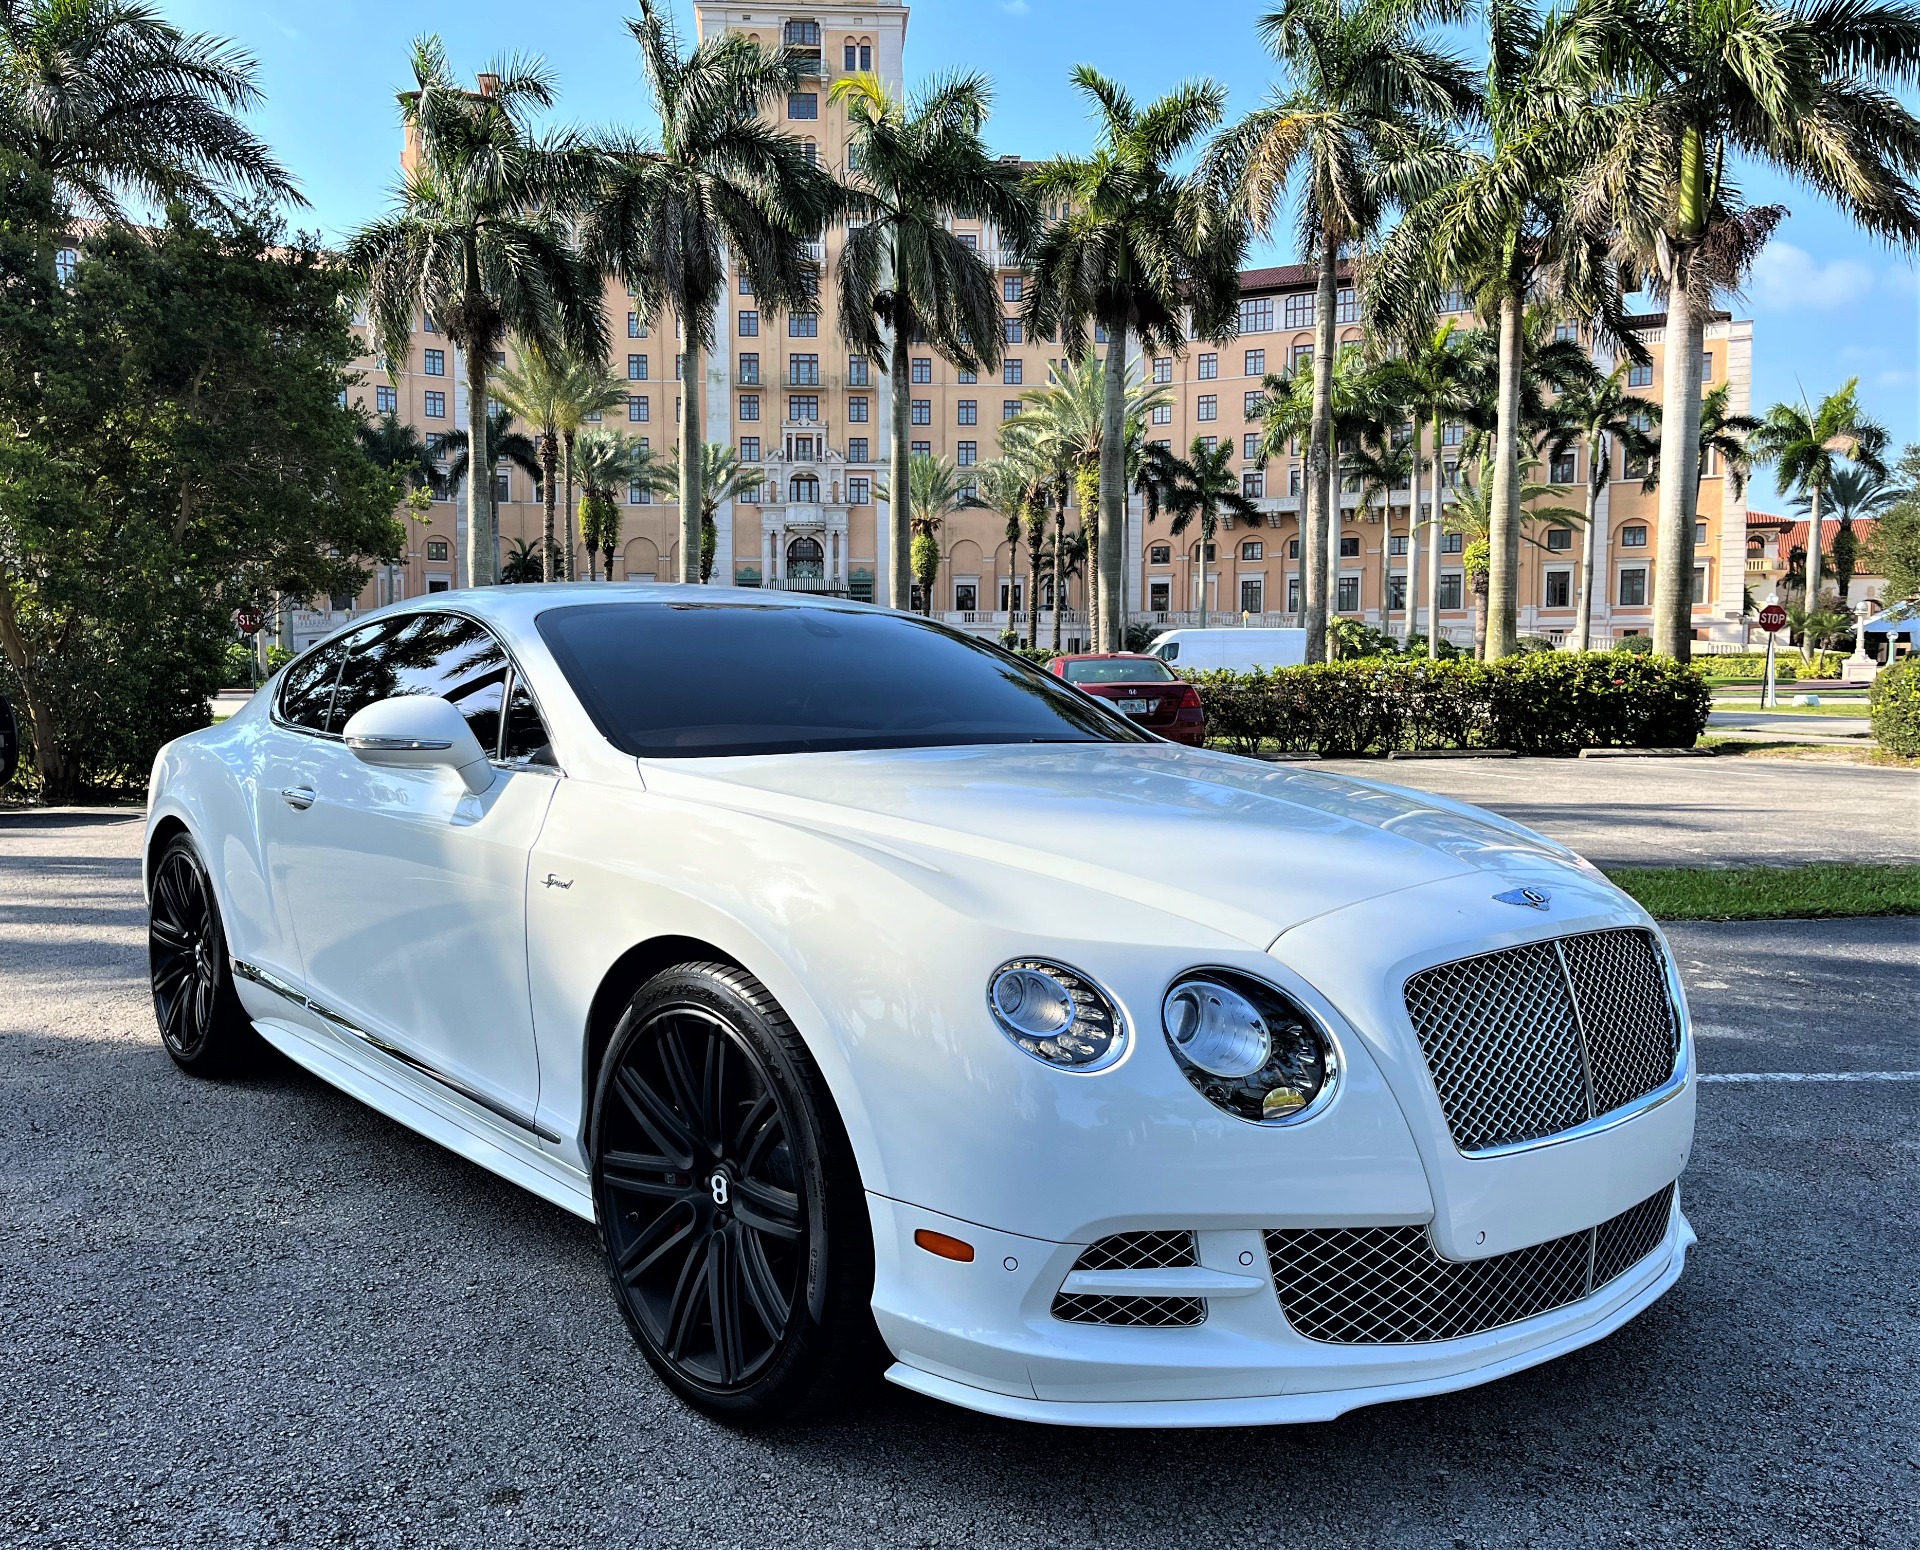 Used 2015 Bentley Continental GT Speed for sale $131,850 at The Gables Sports Cars in Miami FL 33146 1